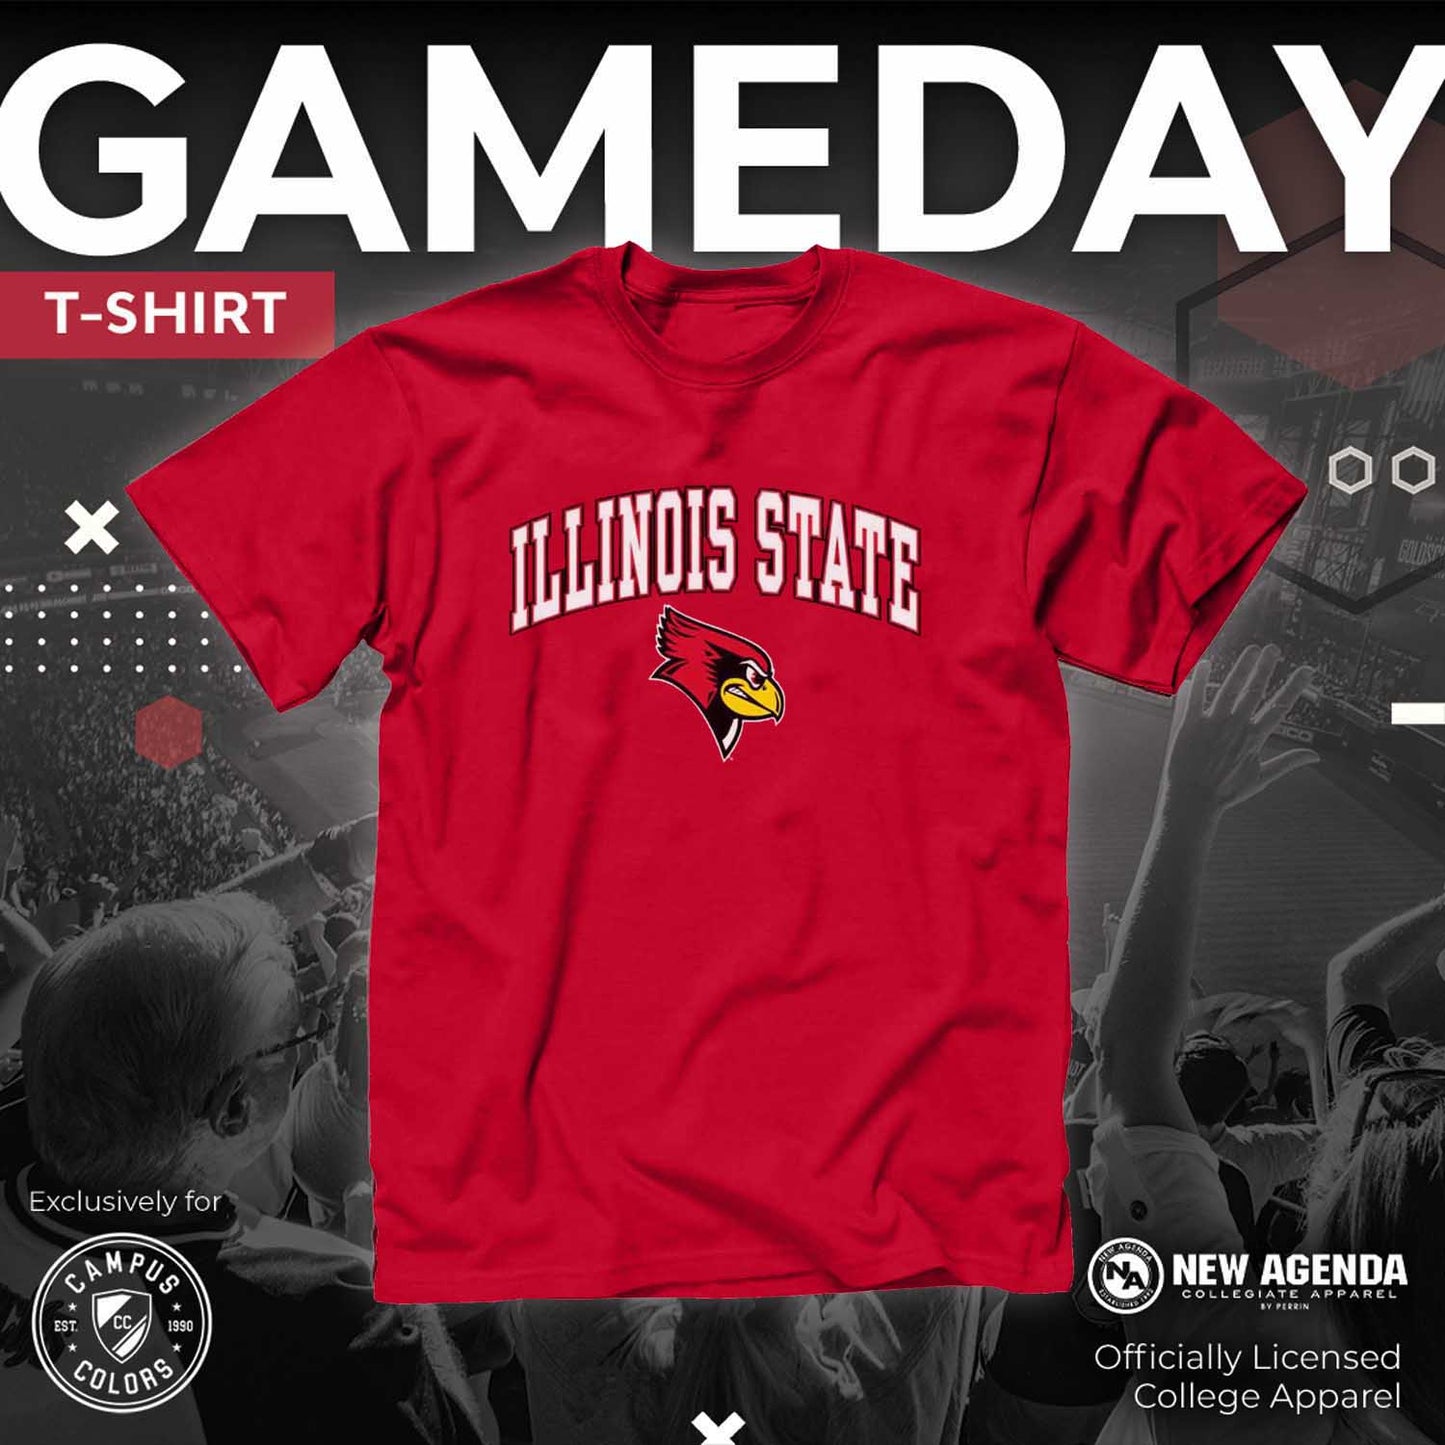 Illinois State Redbirds NCAA Adult Gameday Cotton T-Shirt - Red